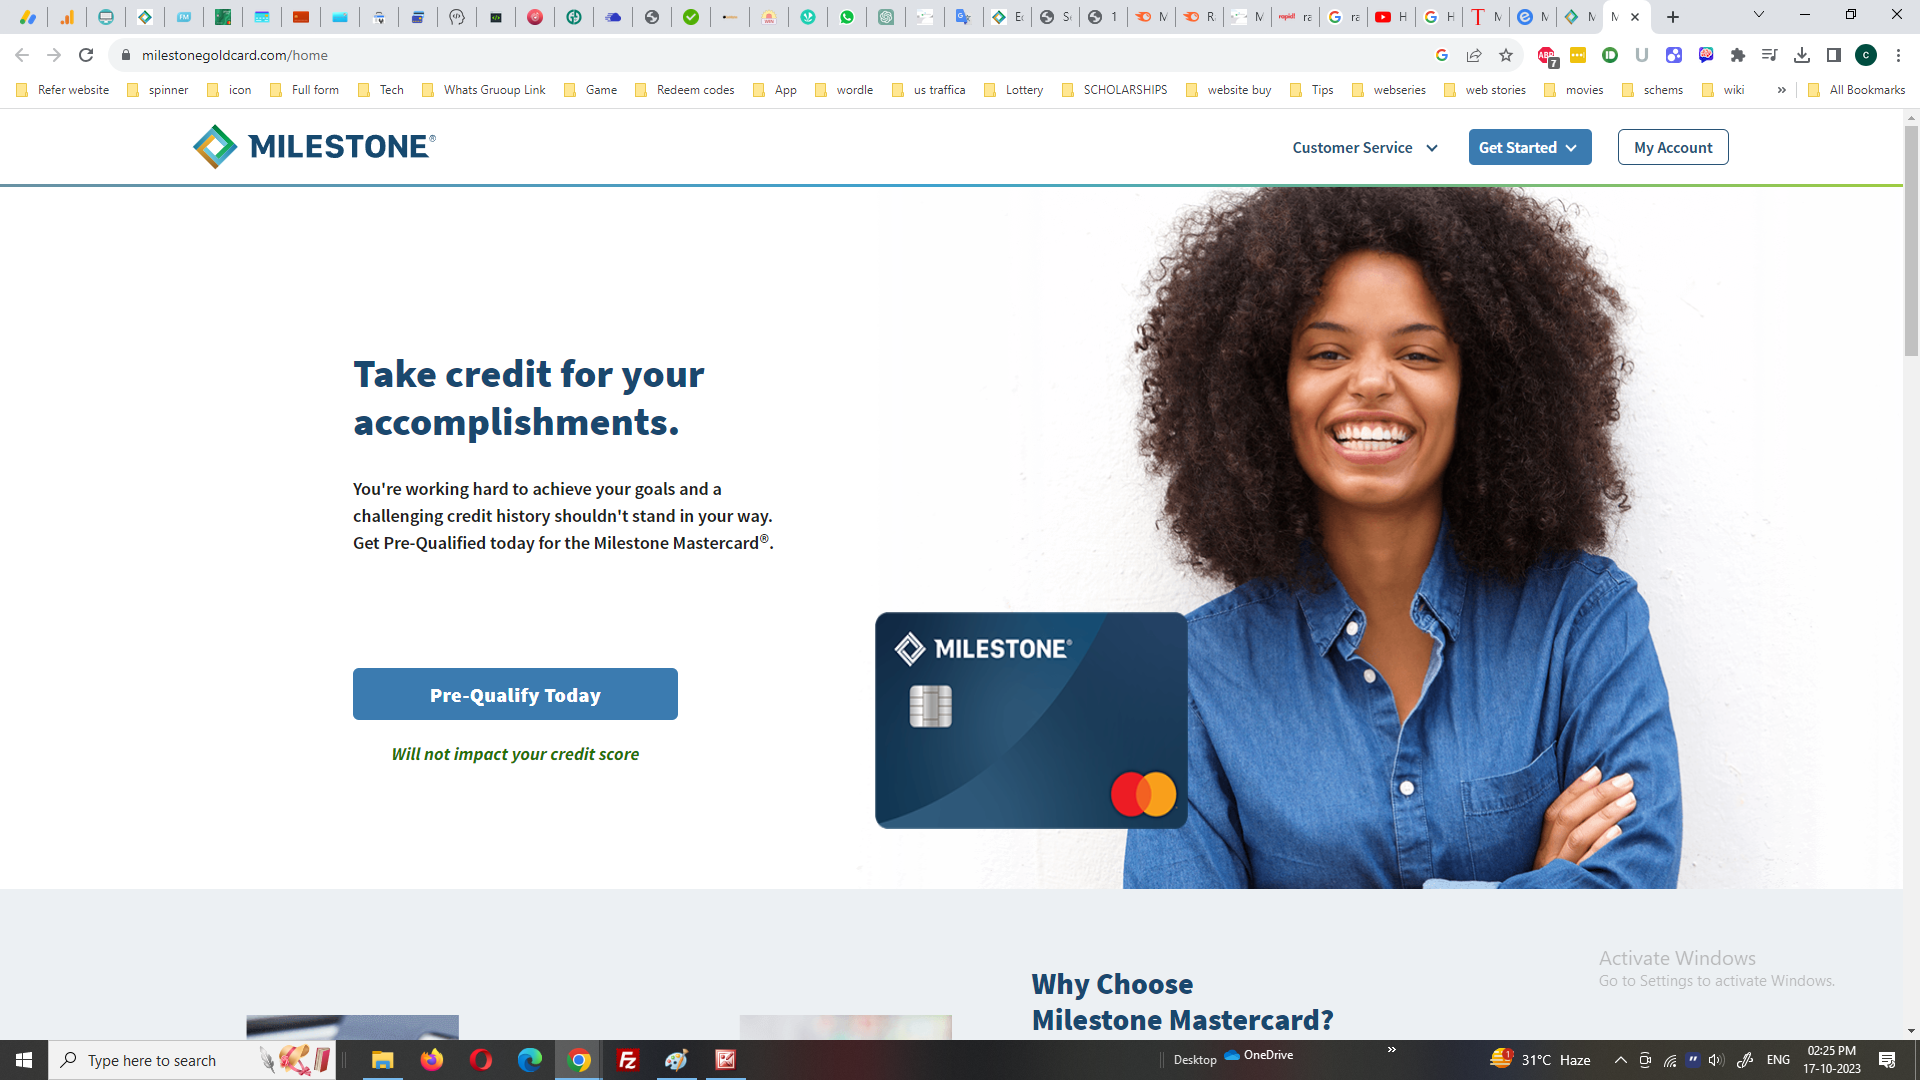 How to Check Your Milestone Credit Card Application Status